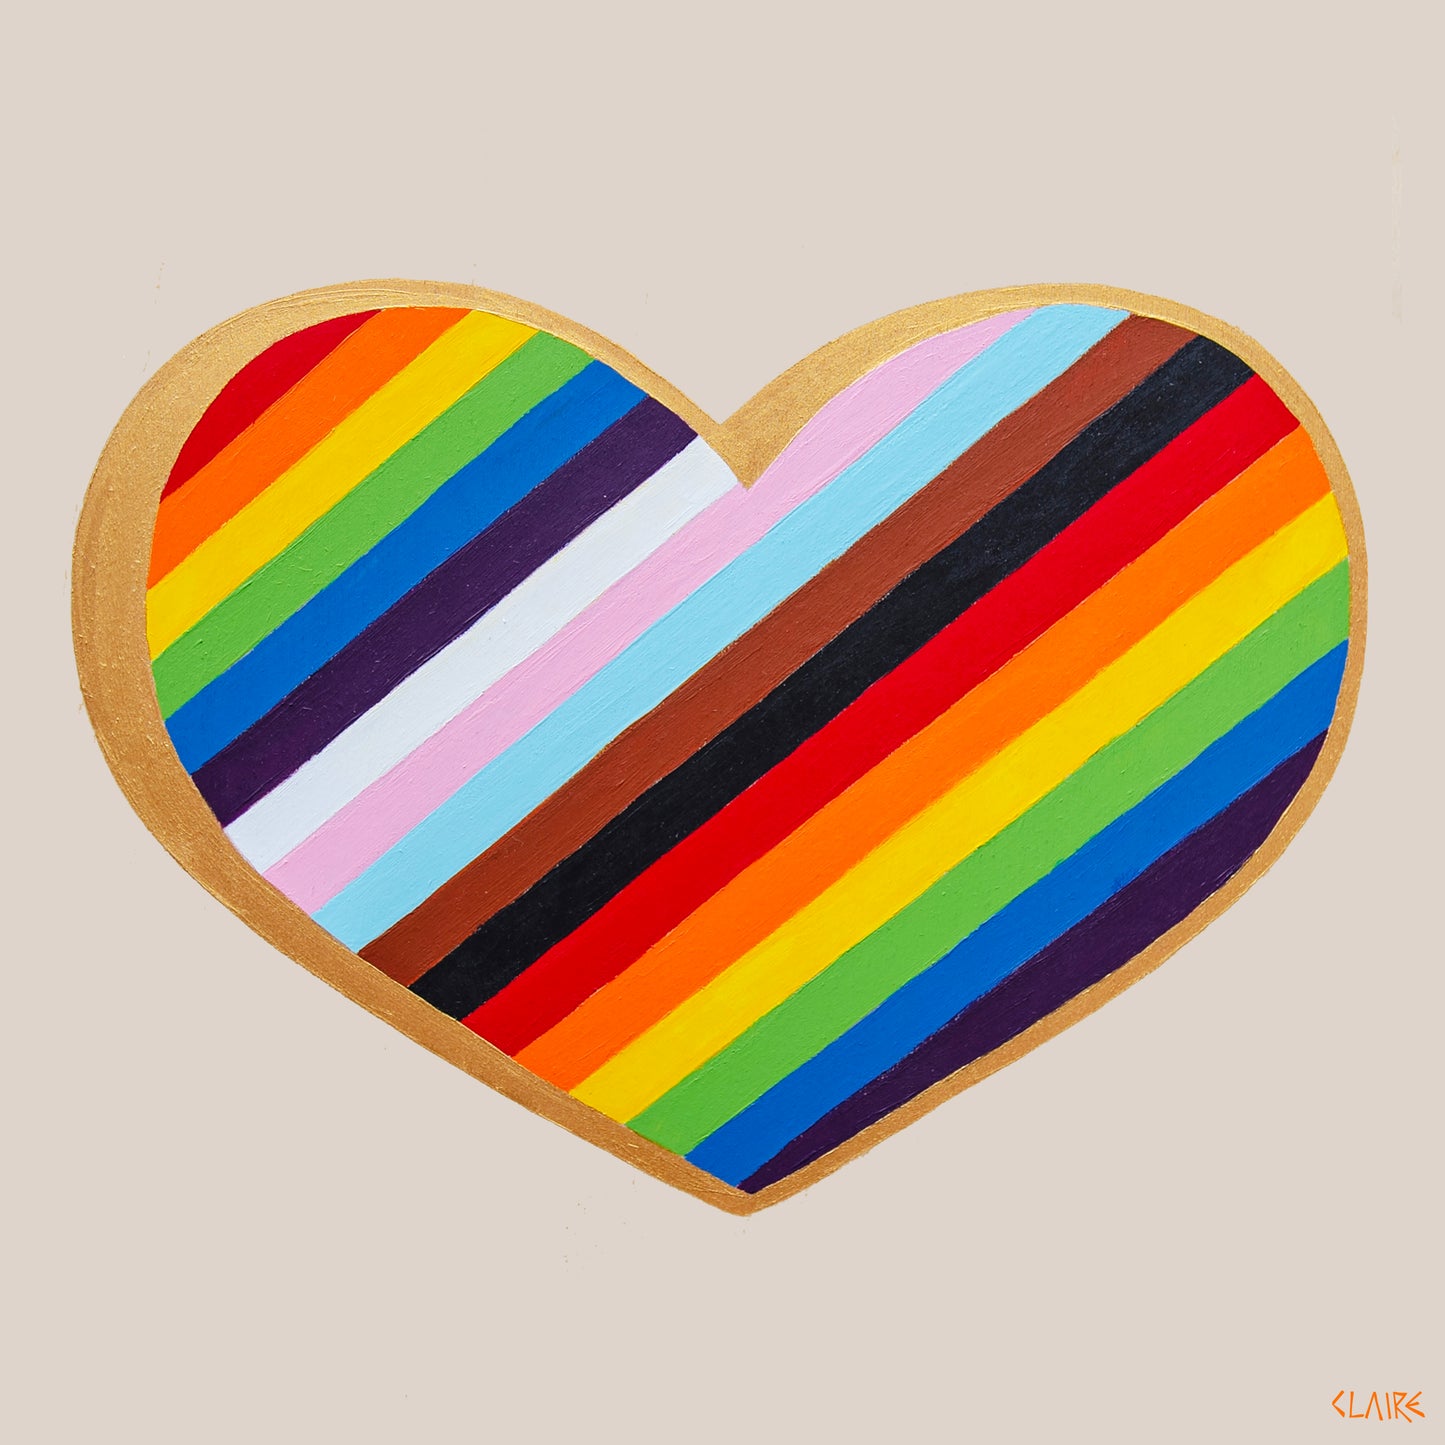 Love is Love (Original & Prints Available)